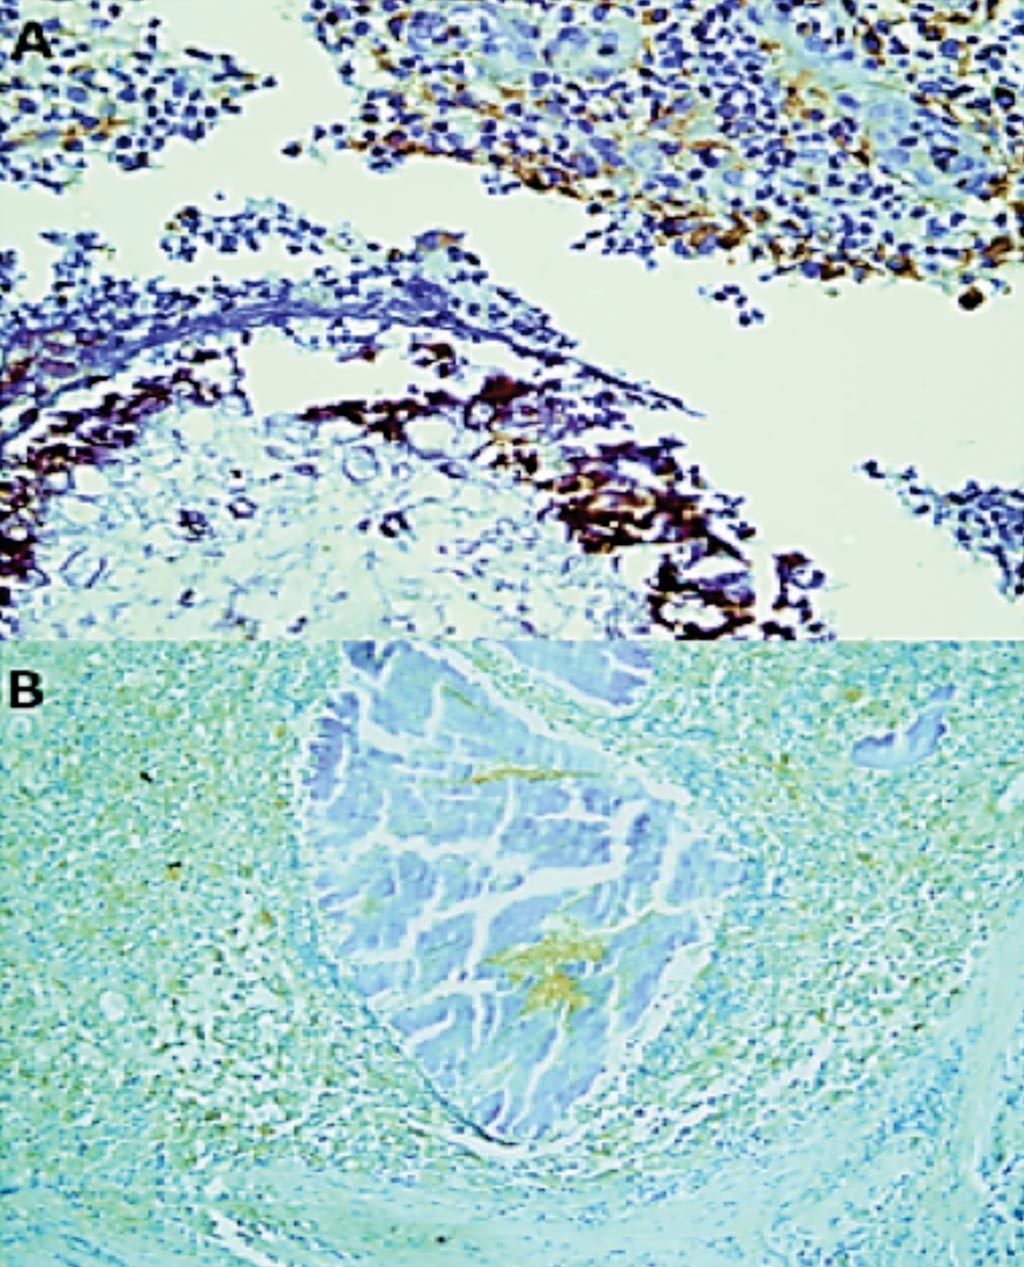 Image: An immunohistochemical staining IL-17A expression in (A) M. mycetomatis, and (B) S. somaliensis. IL-17A staining was seen as a brown cytoplasmic staining in cells (Photo courtesy of University of Khartoum).